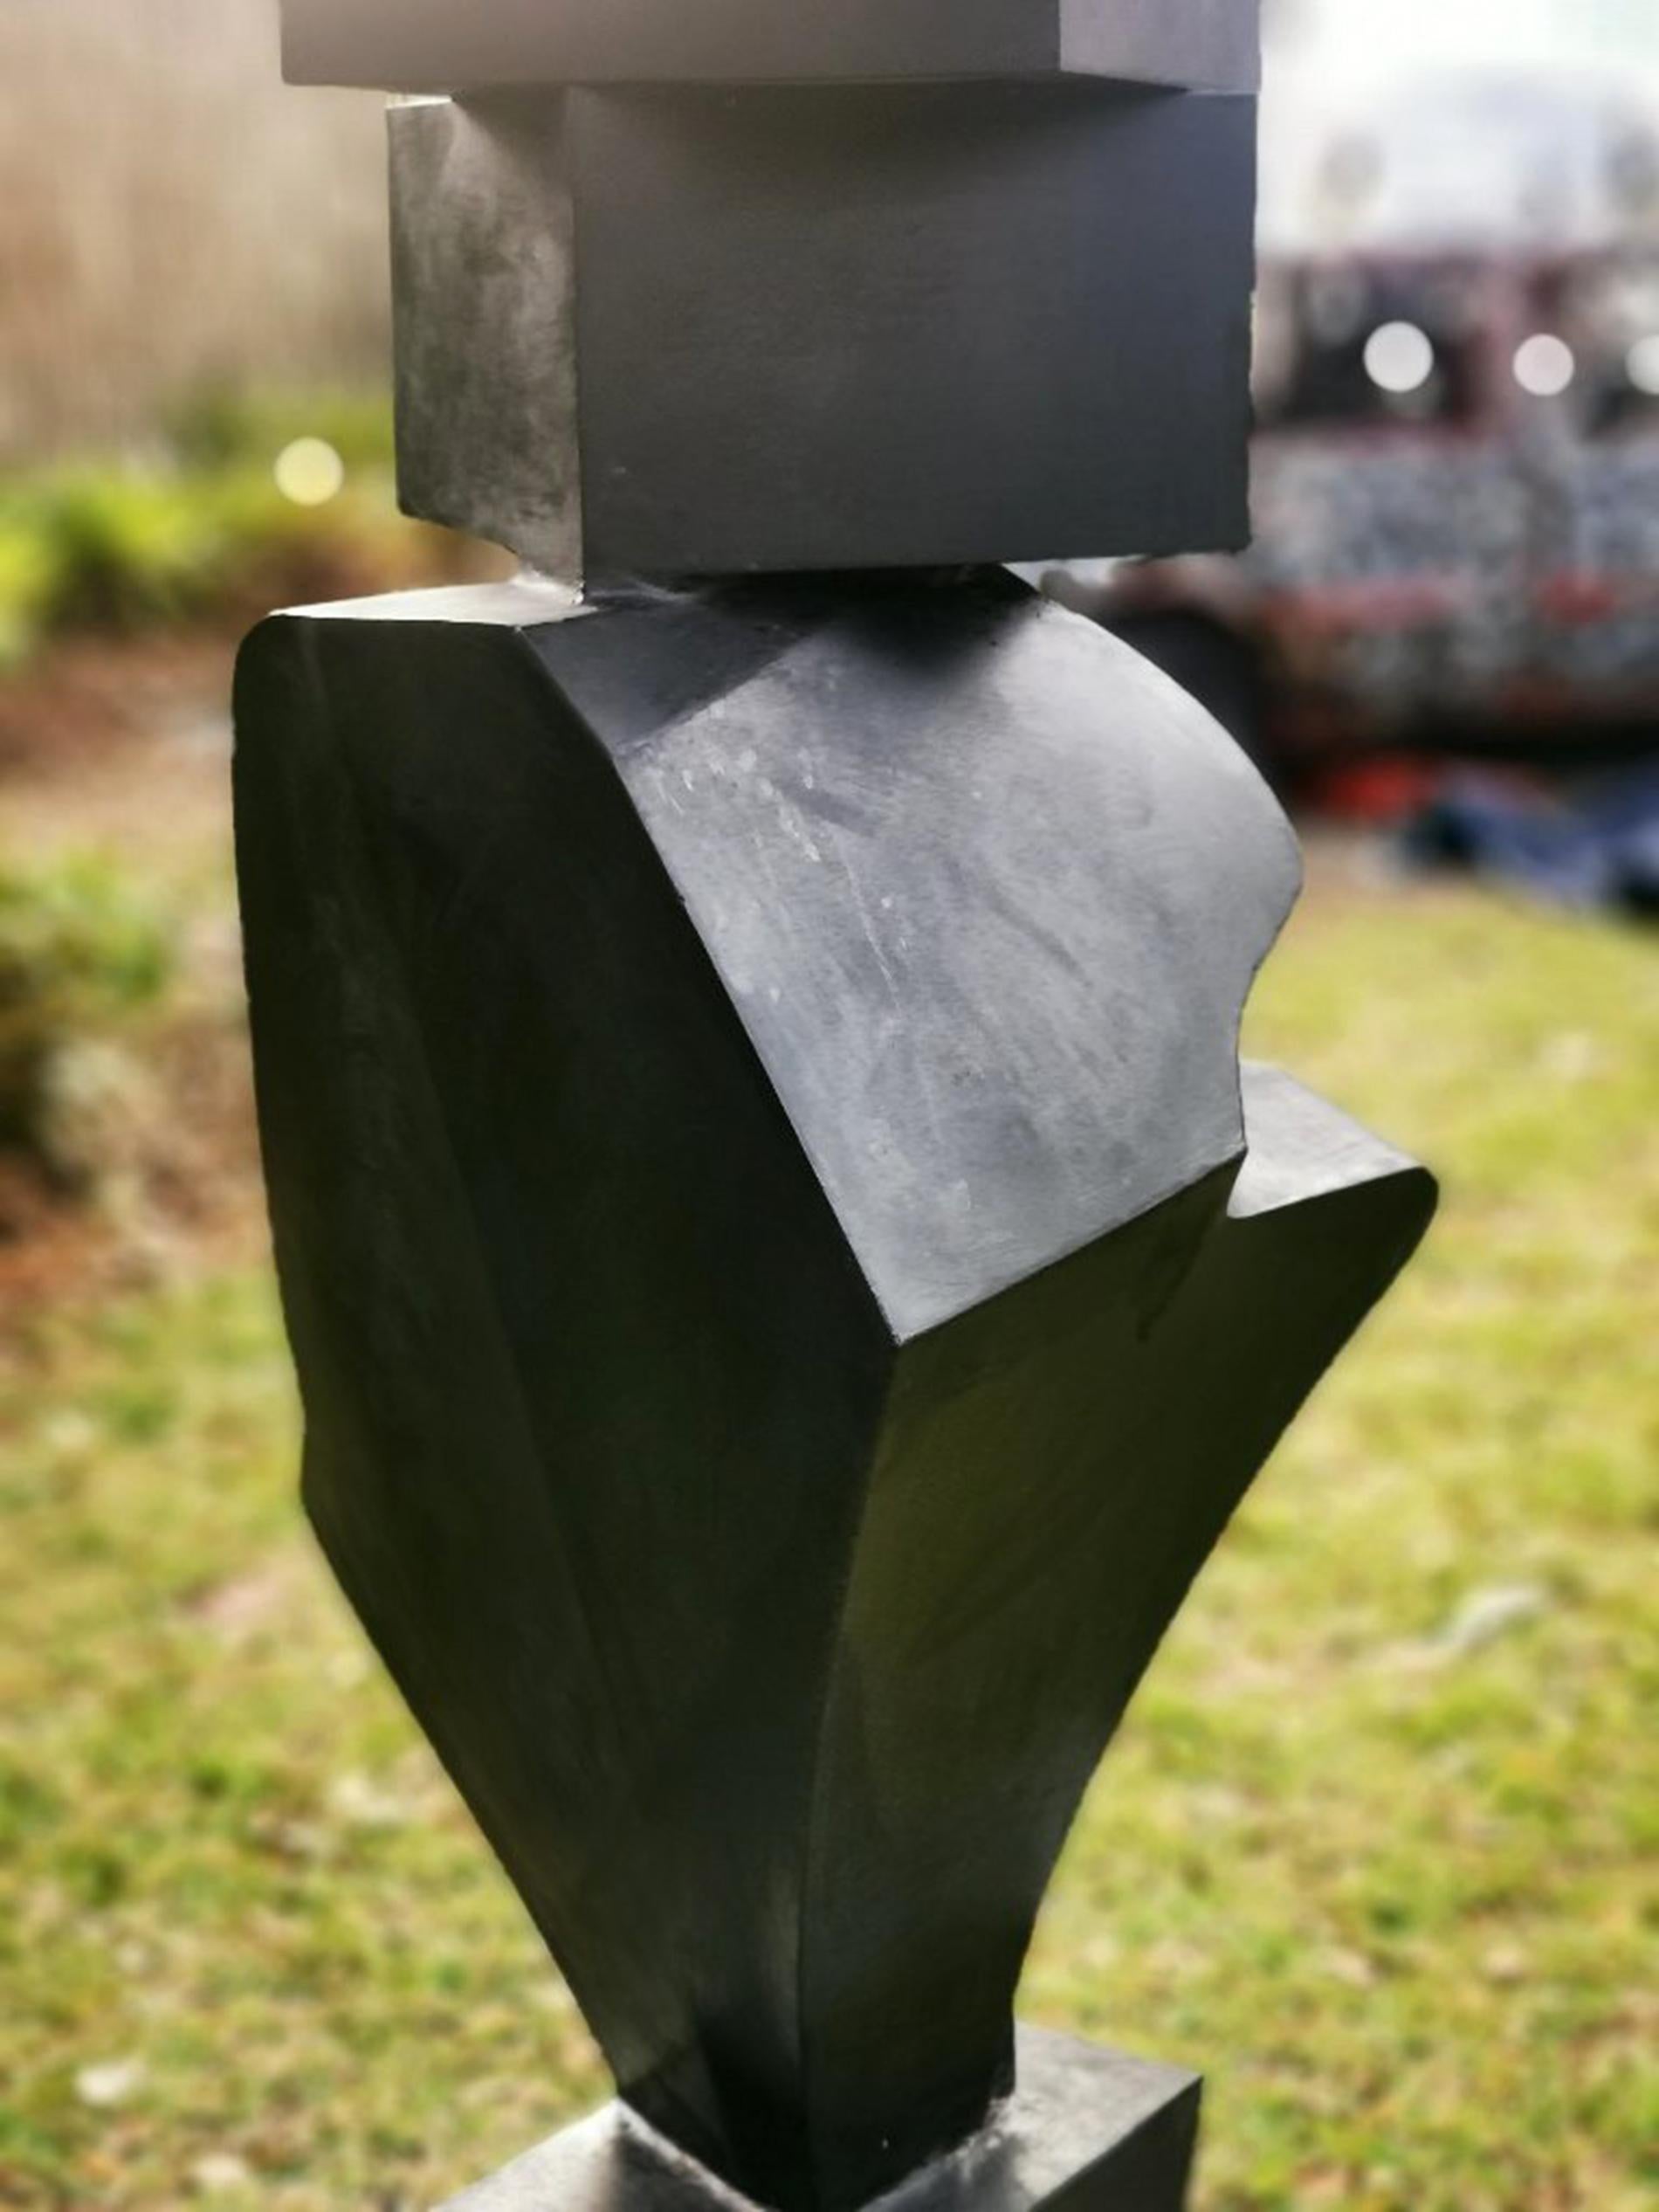 Heartland V2 - tall, black, abstract patinated stainless steel outdoor sculpture - Contemporary Sculpture by Viktor Mitic